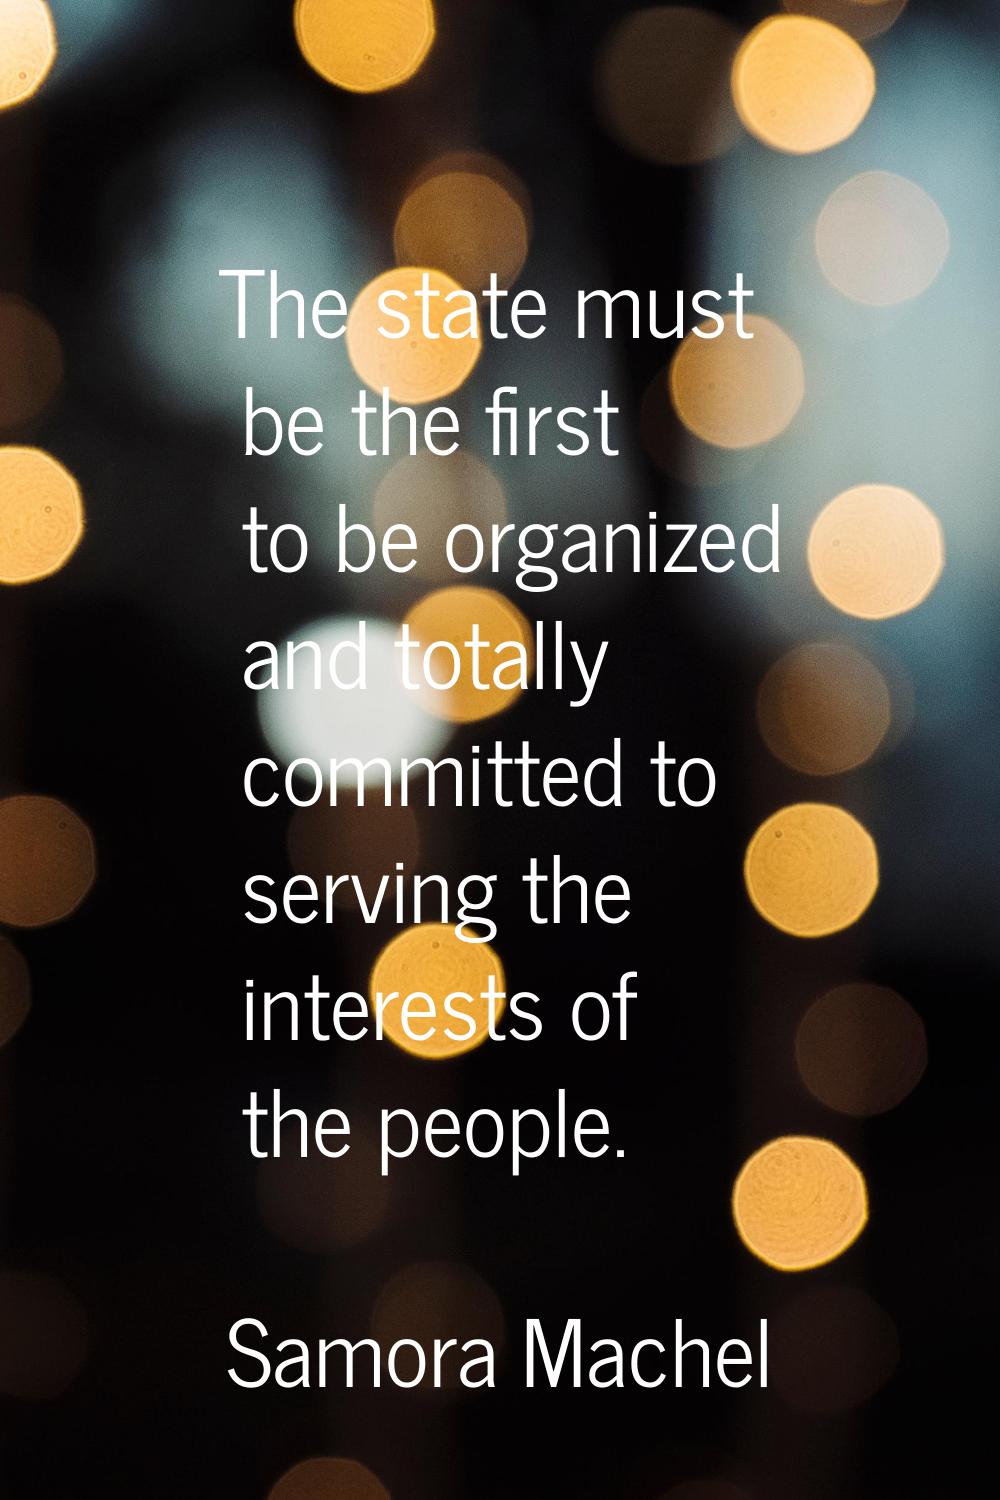 The state must be the first to be organized and totally committed to serving the interests of the p